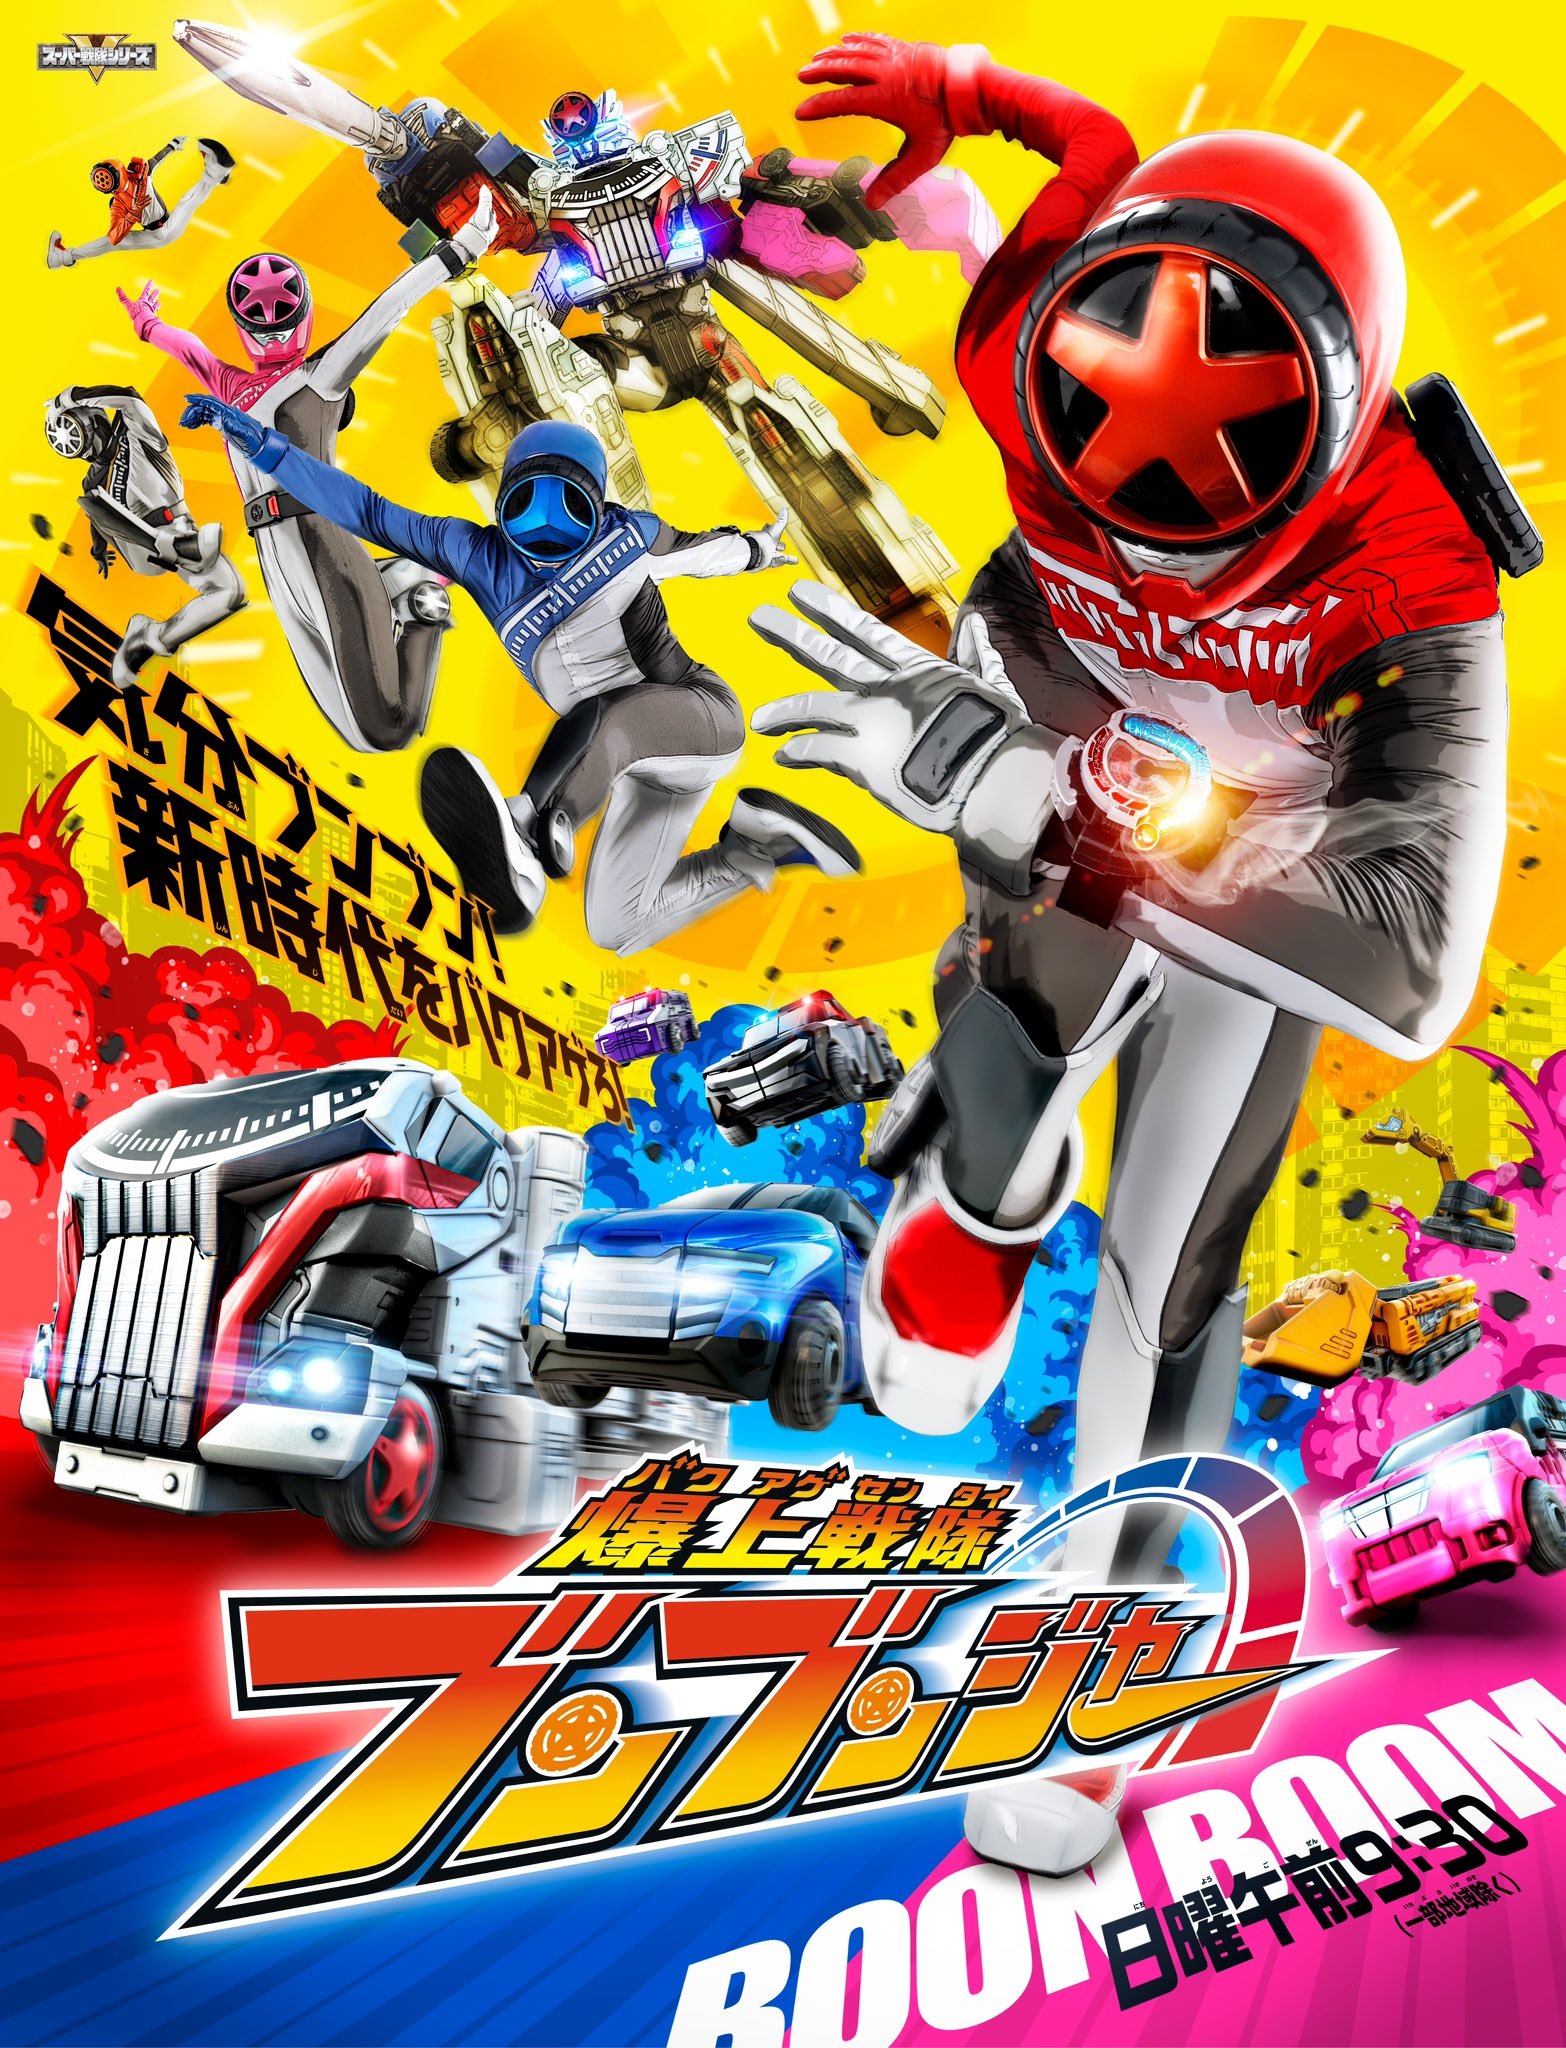 Mega Sized TV Poster Image for Bakuage Sentai Boonboomger (#3 of 3)